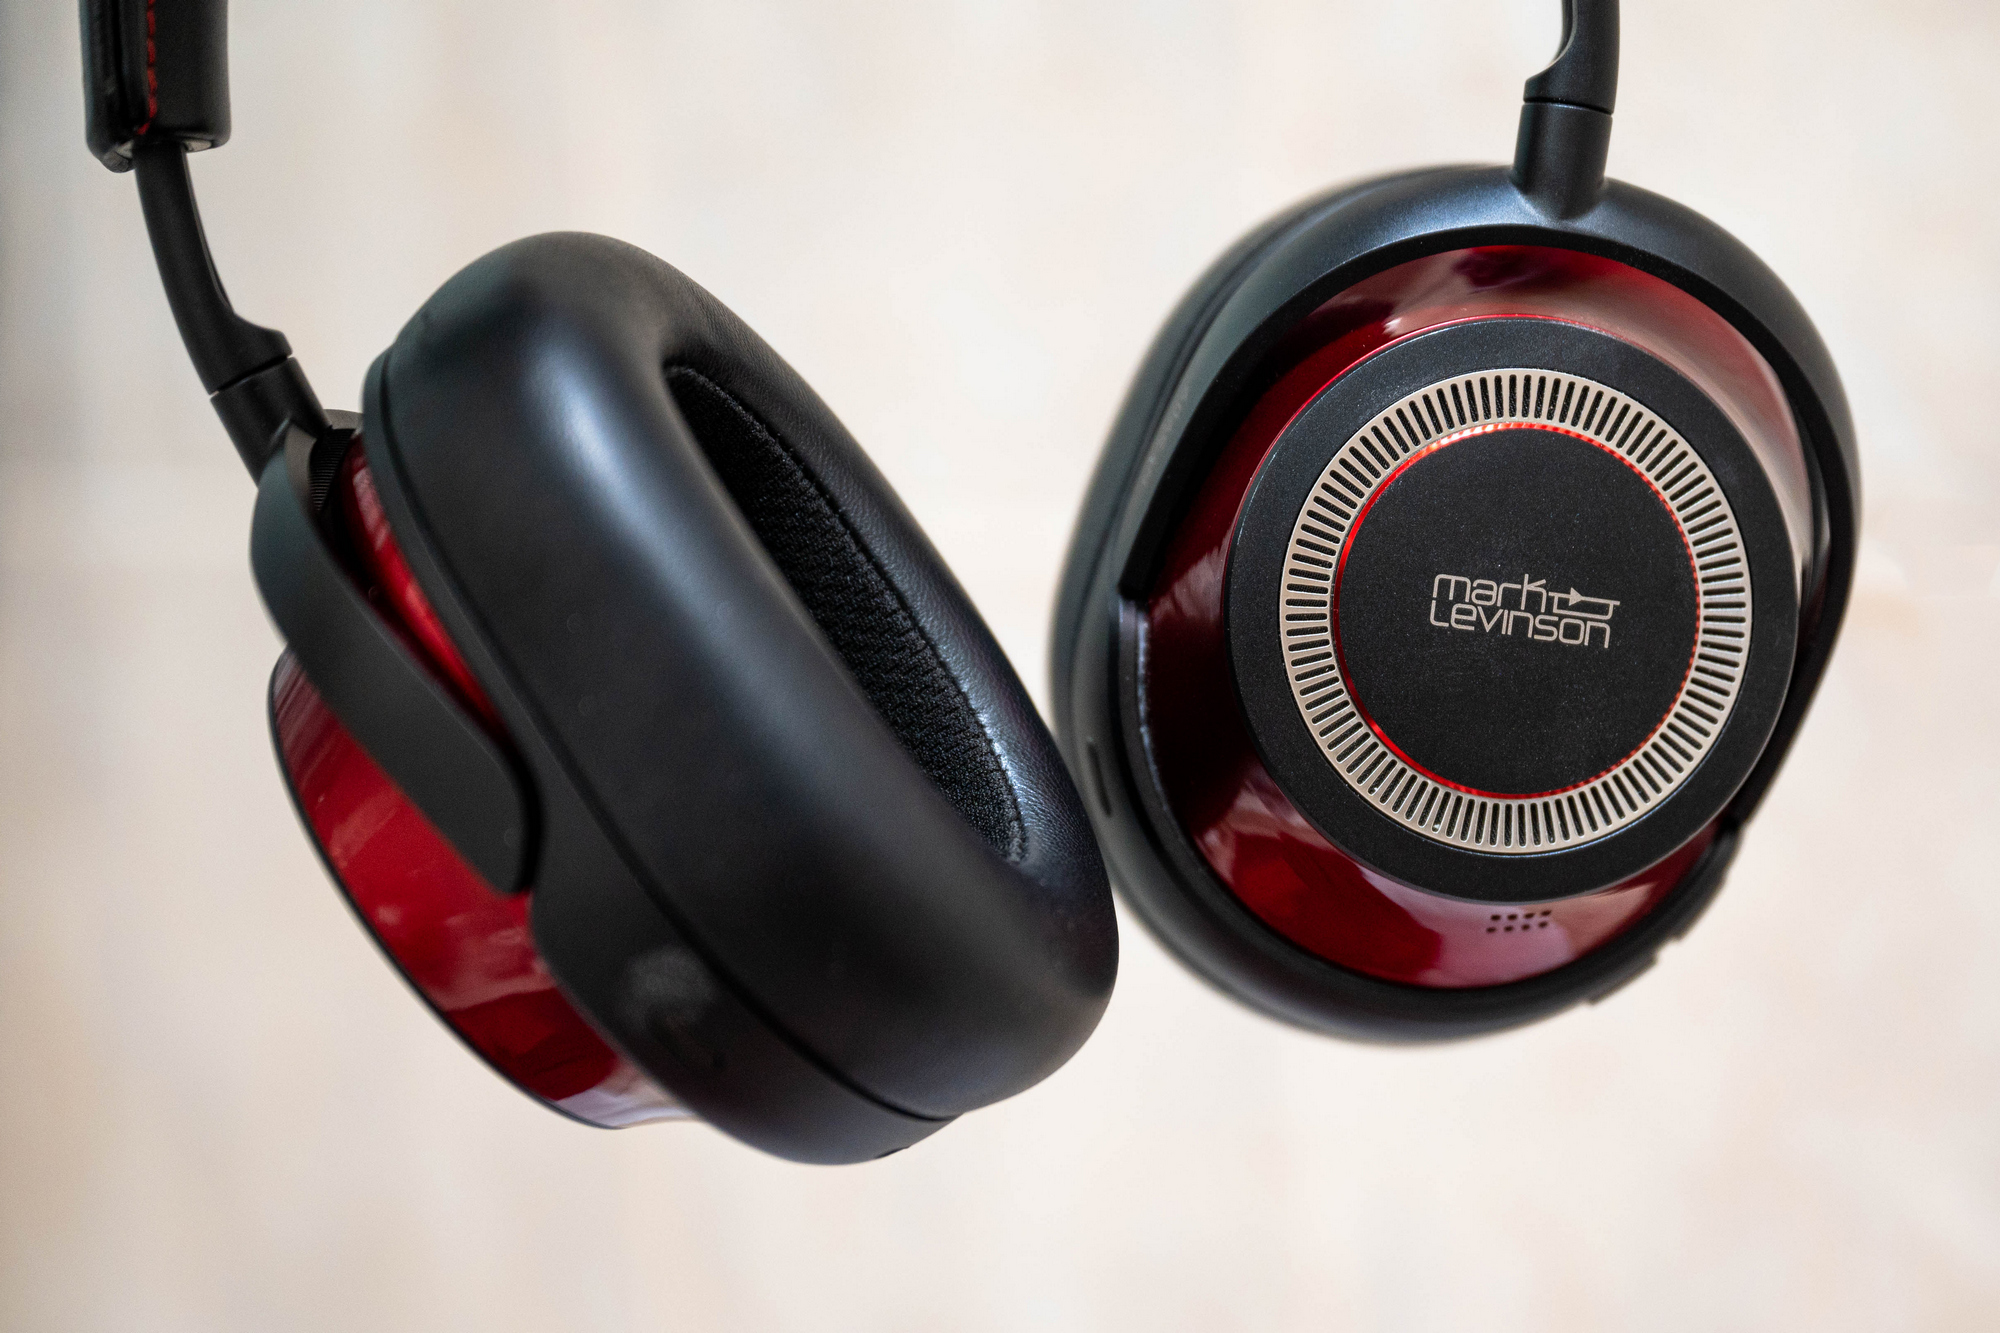 Mark Levinson No. 5909 -- Most luxurious noise-cancelling headphone